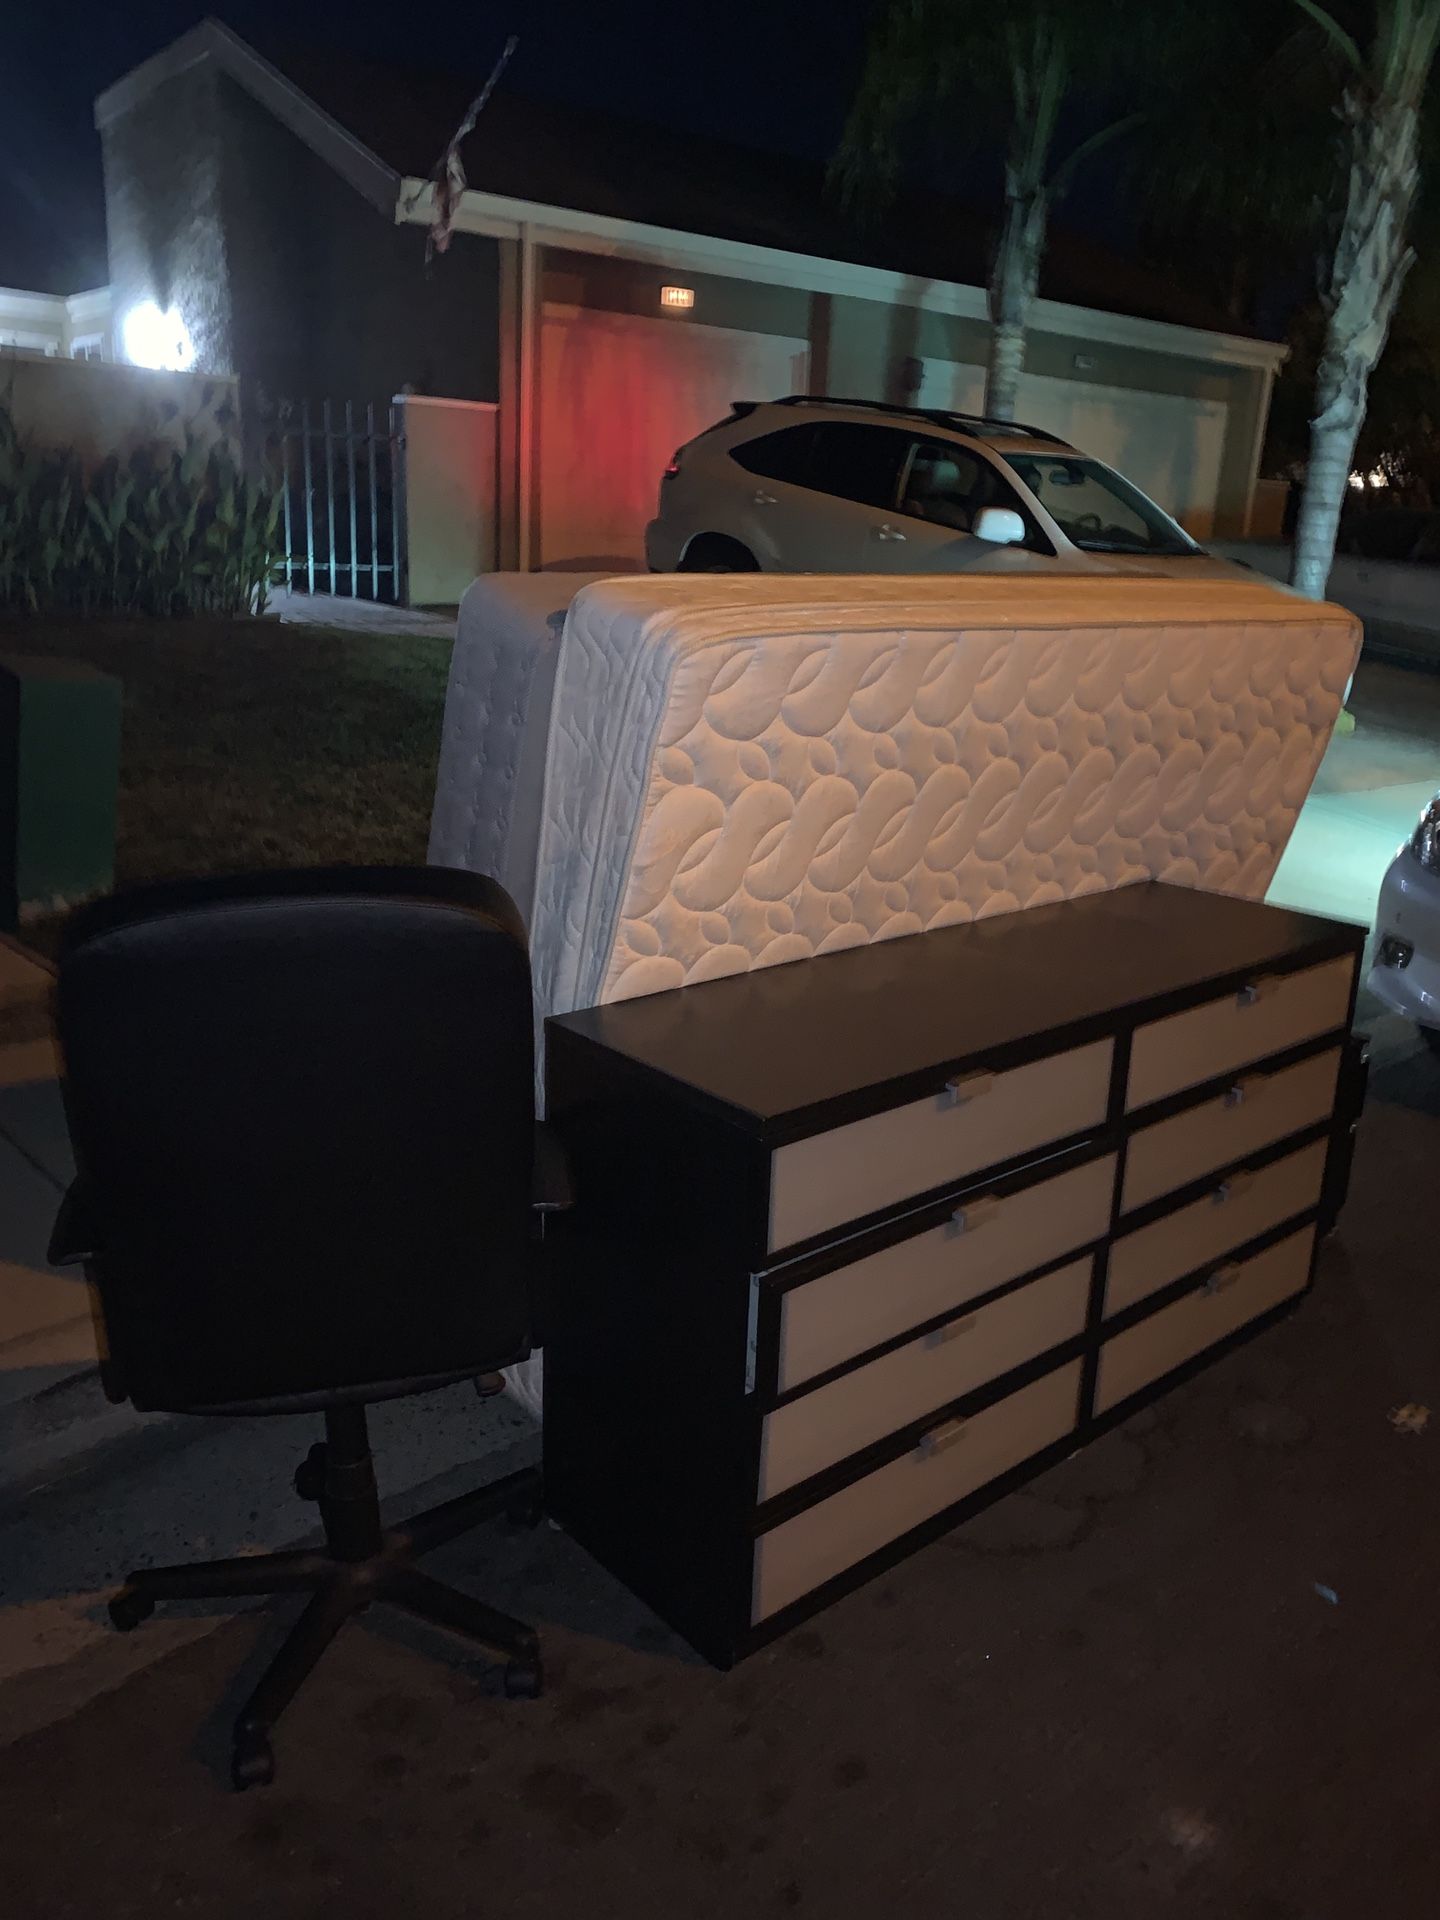 Free furniture - pick up now